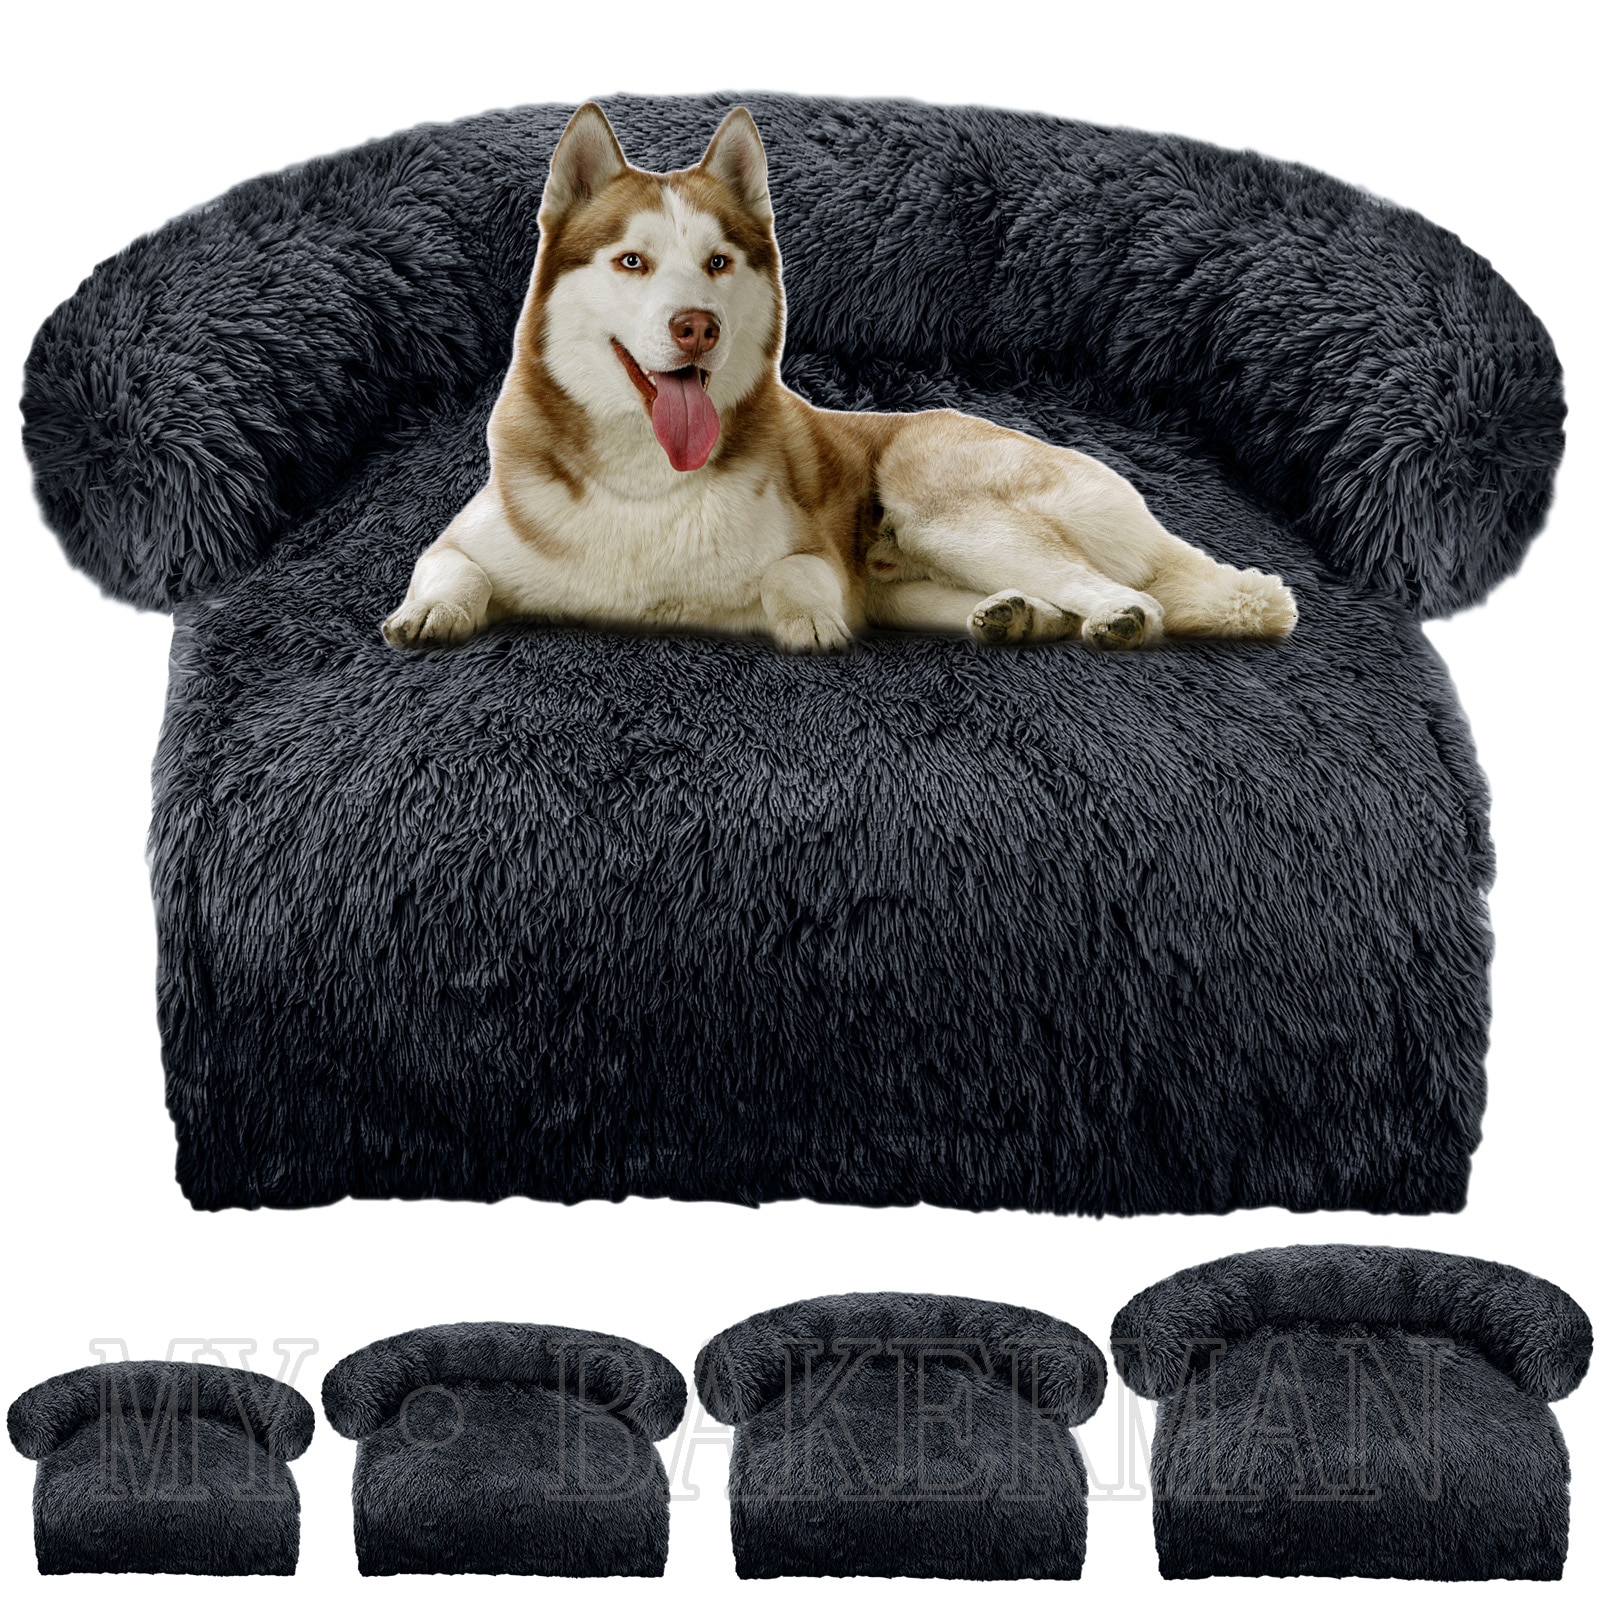 1188832217 1 - Large Plush Dog Sofa Bed Couch Protector - thepamperedpooch-co, pet-beds, dog-beds